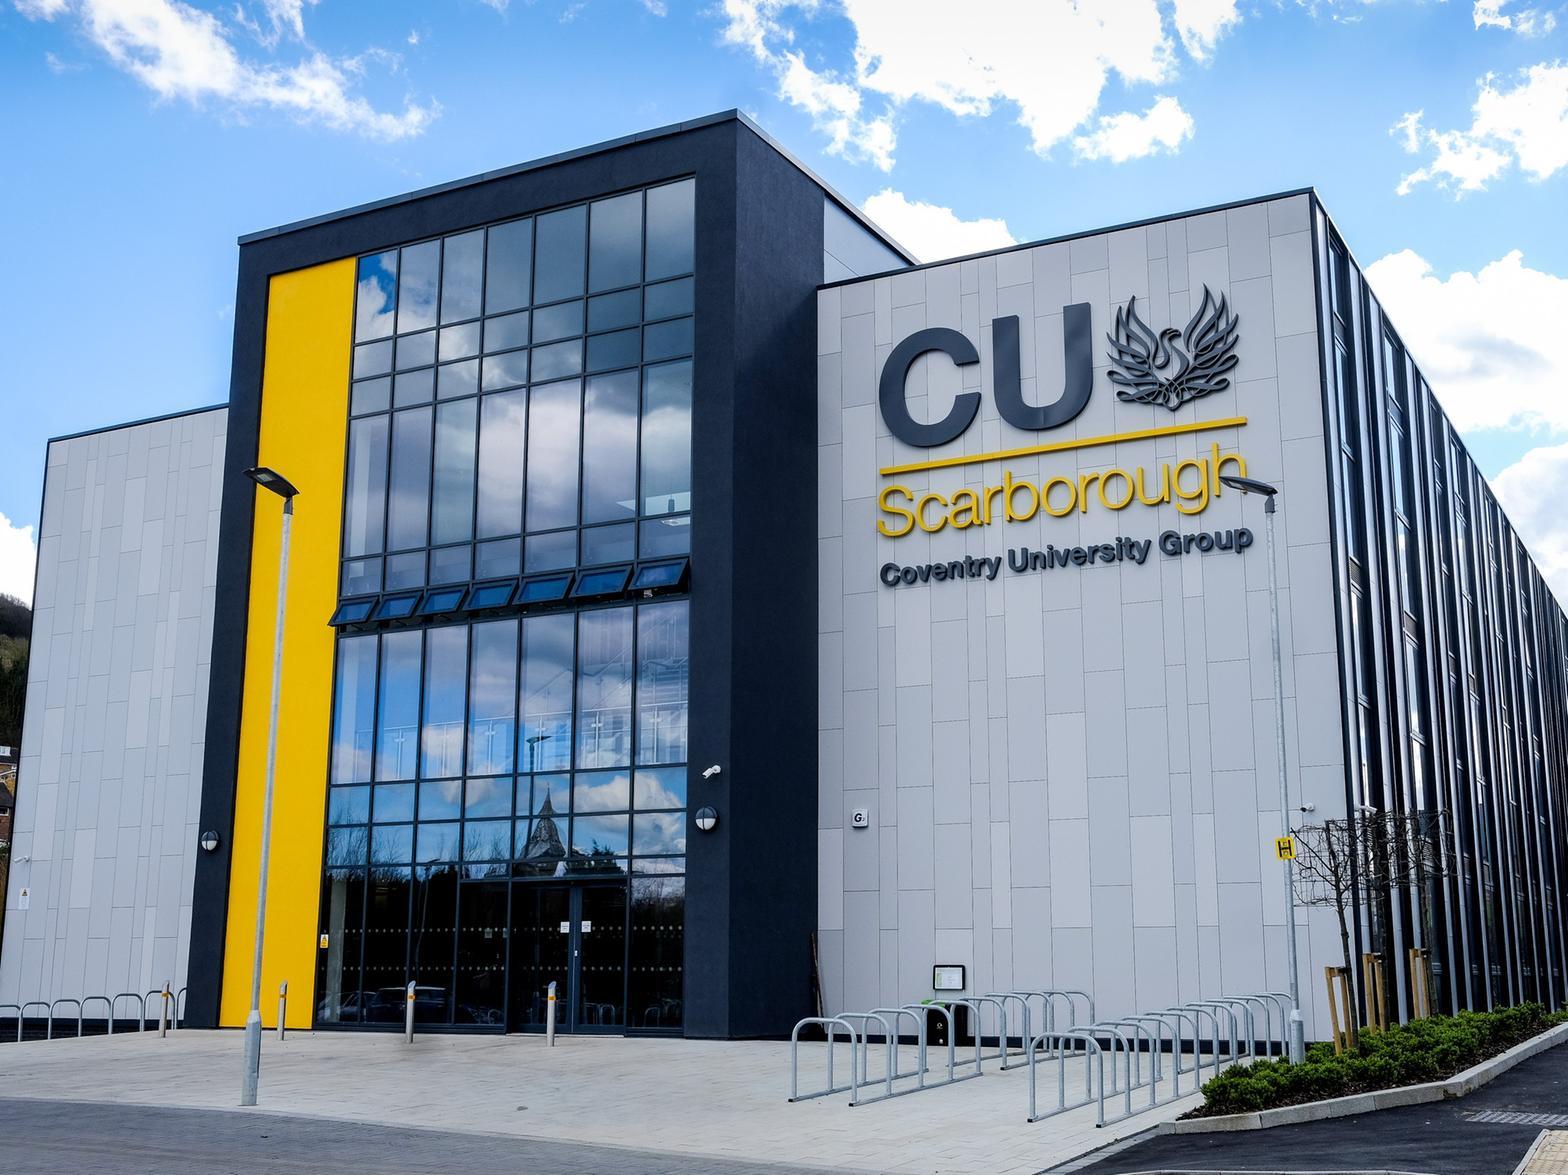 For many years the University of Hull has a campus in Scarborough based on Filey Road. The satellite campus was wound down in 2015, becoming part of the Hull College group. CU Scarborough arrived in 2015.